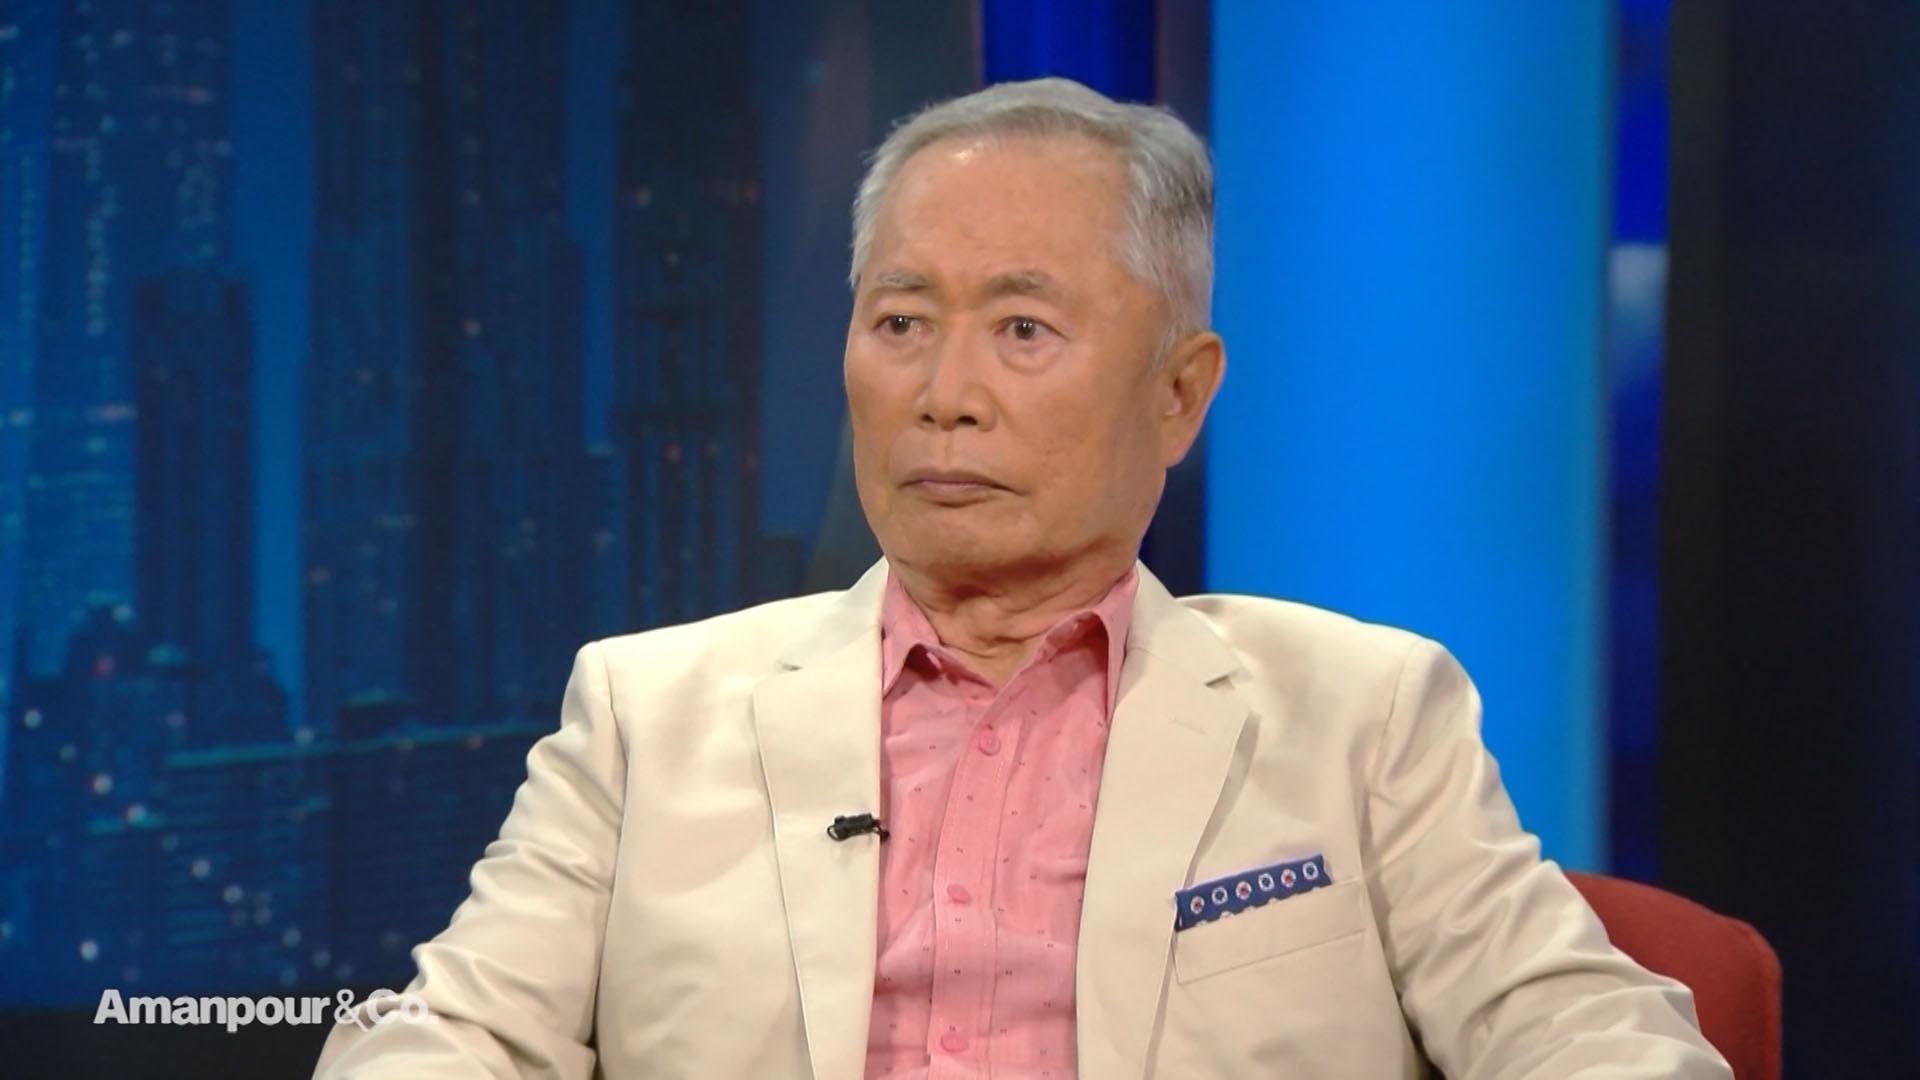 George Takei Wallpapers